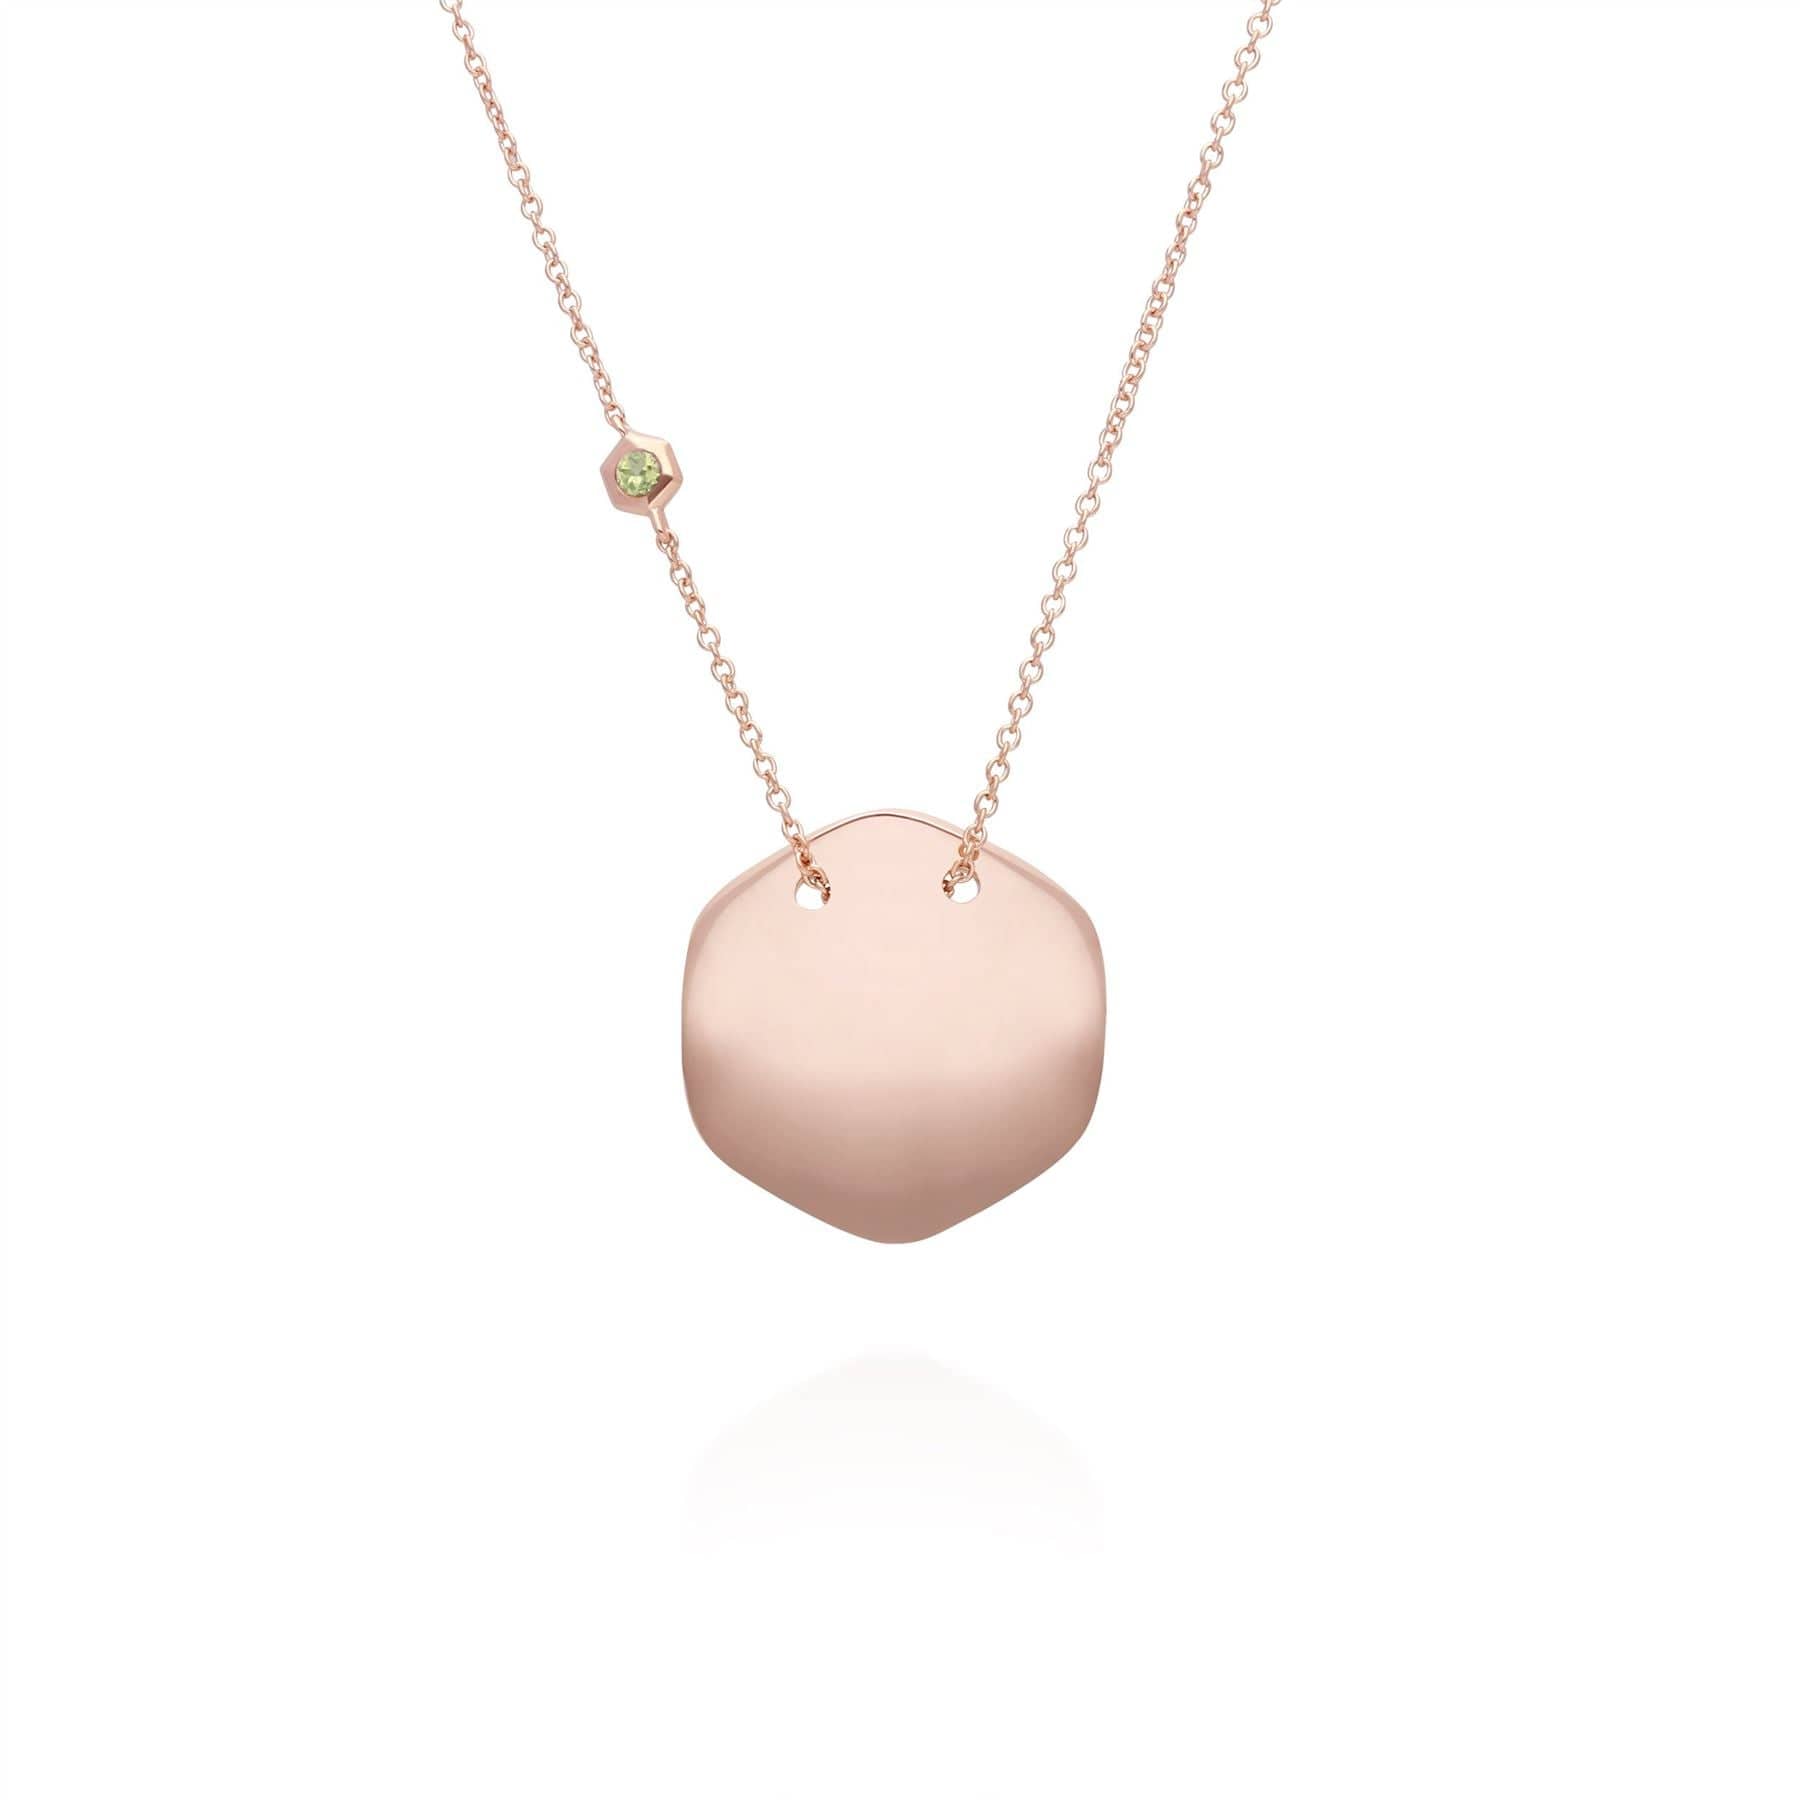 Peridot Engravable Necklace in Rose Gold Plated Sterling Silver - Gemondo